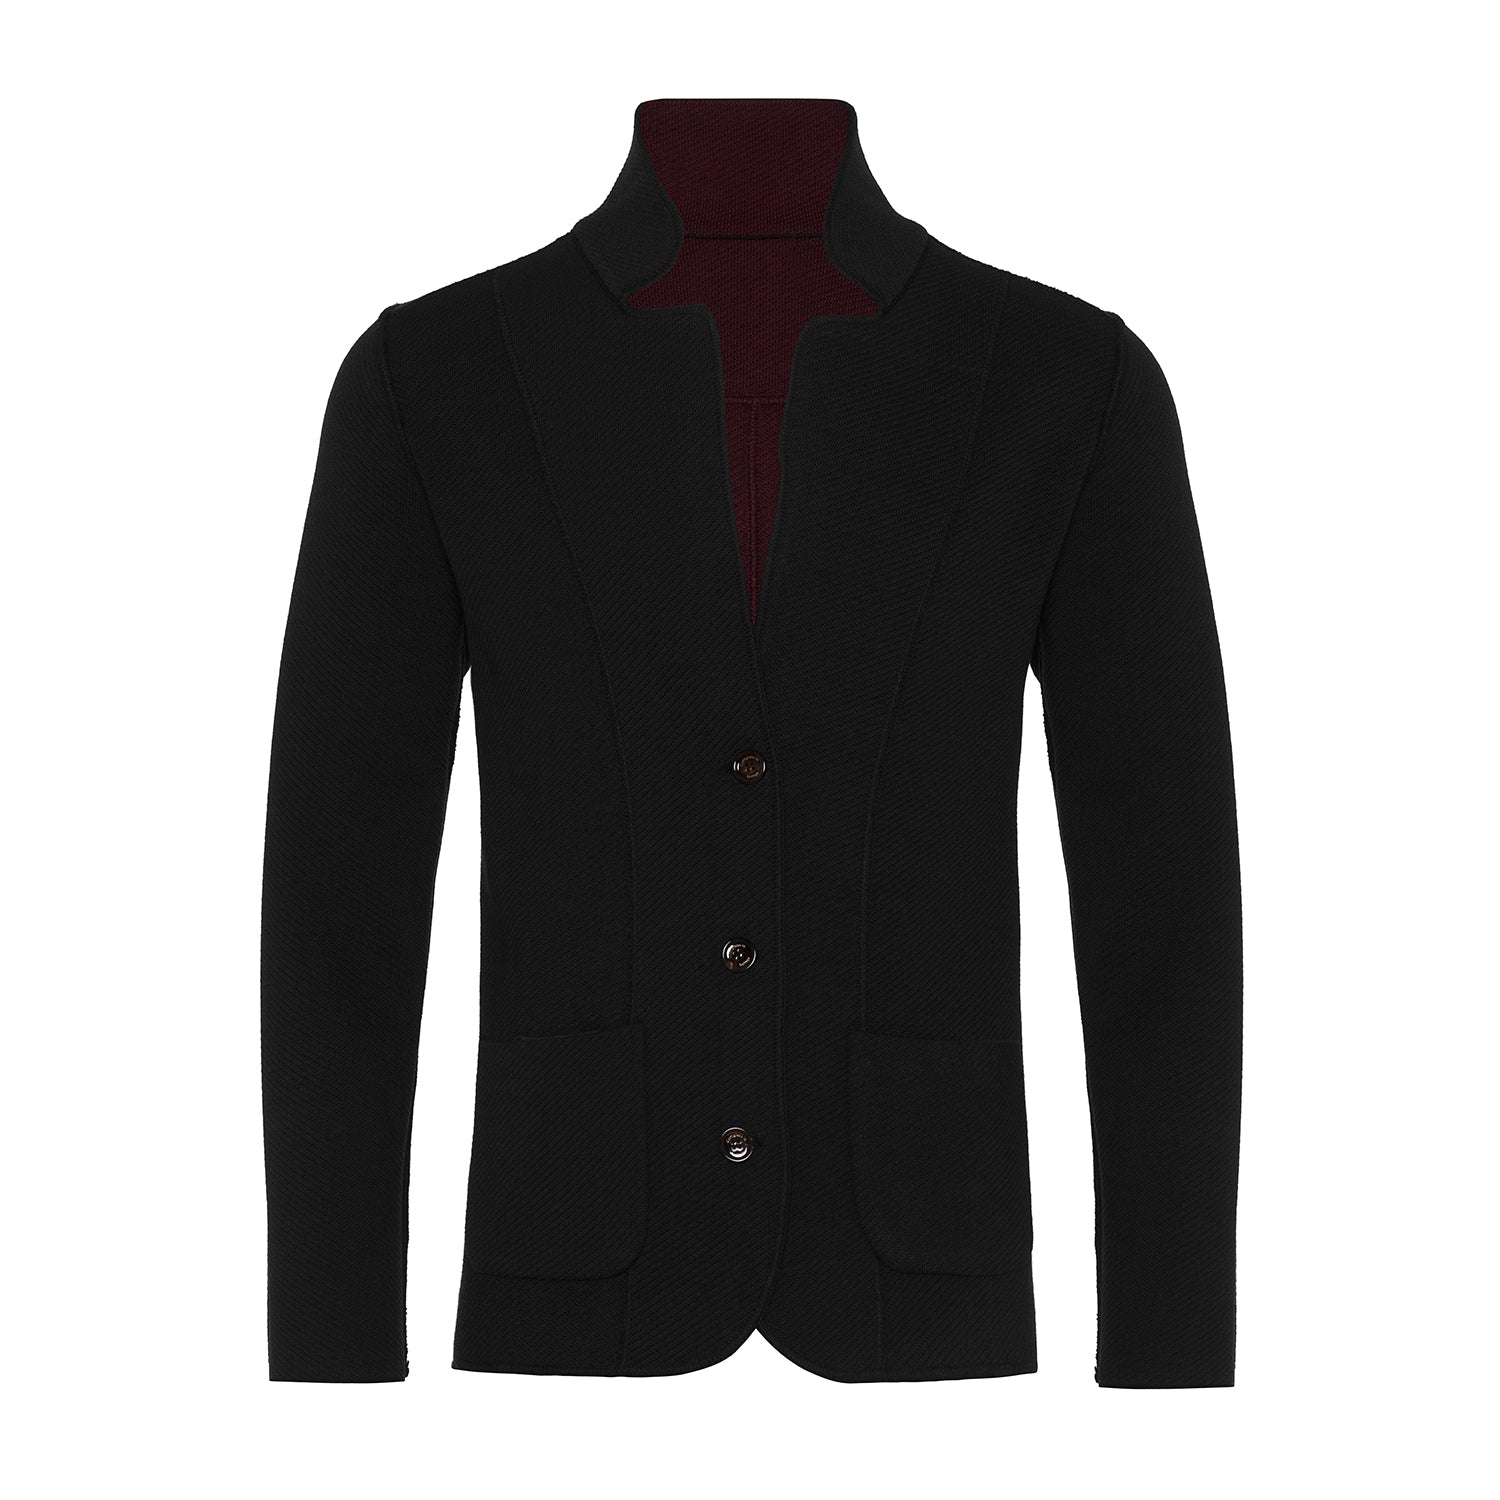 Double Face Blazer in Burgundy and Back